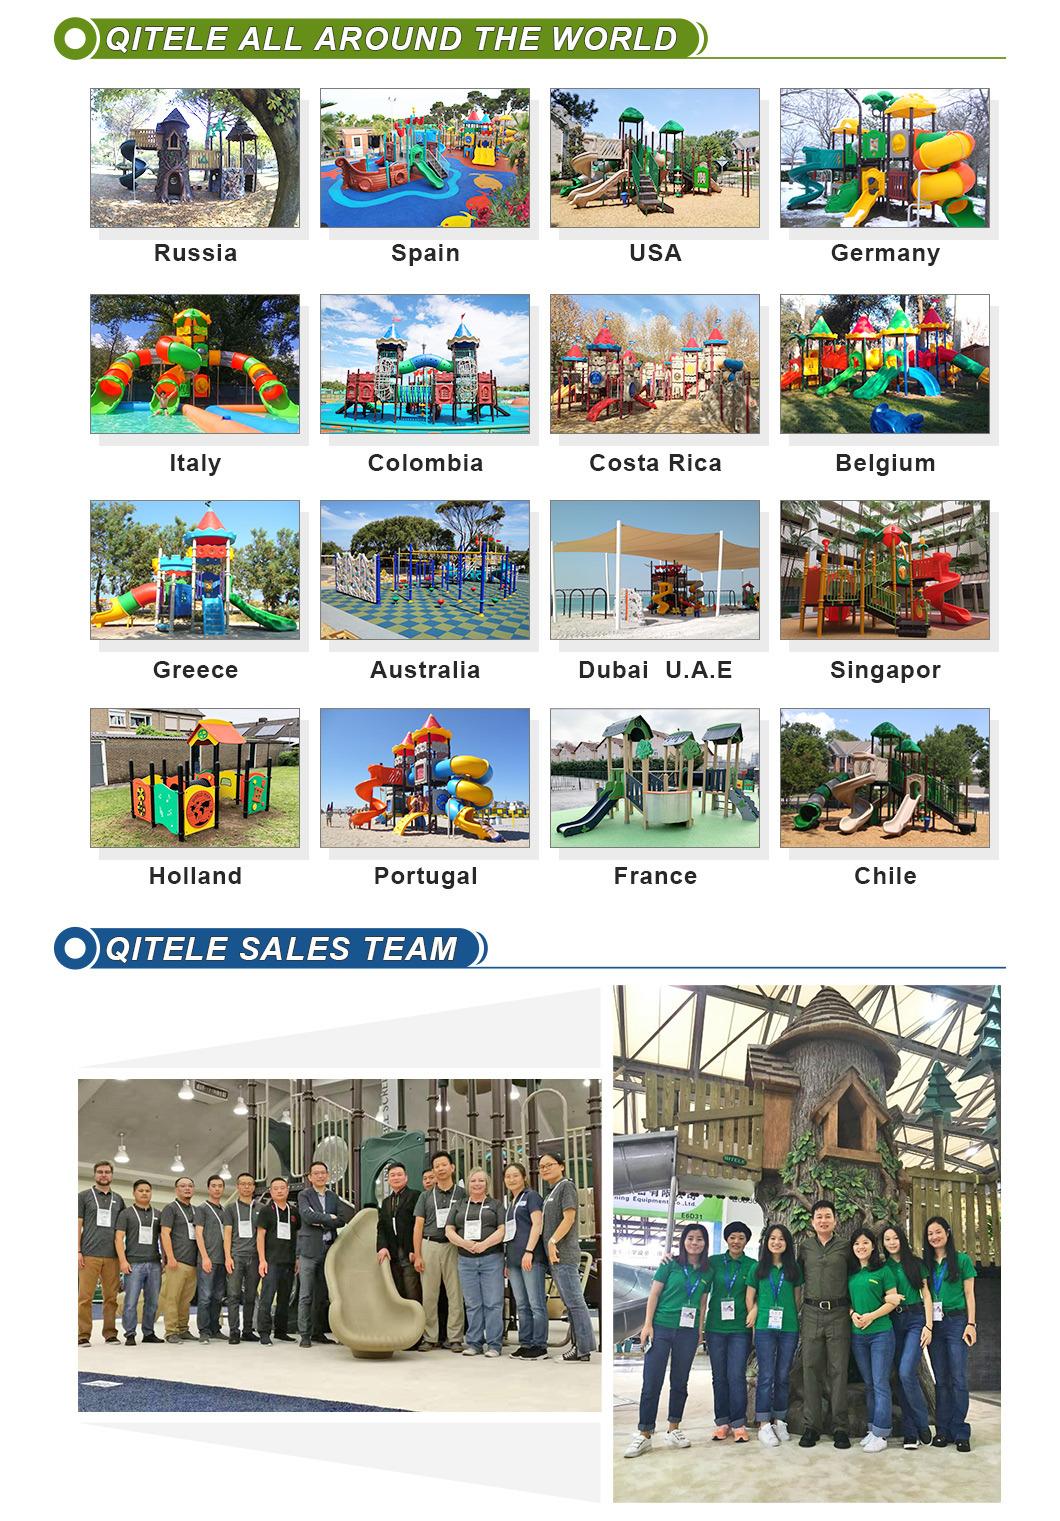 Outdoor Playground Equipment with Different Slide